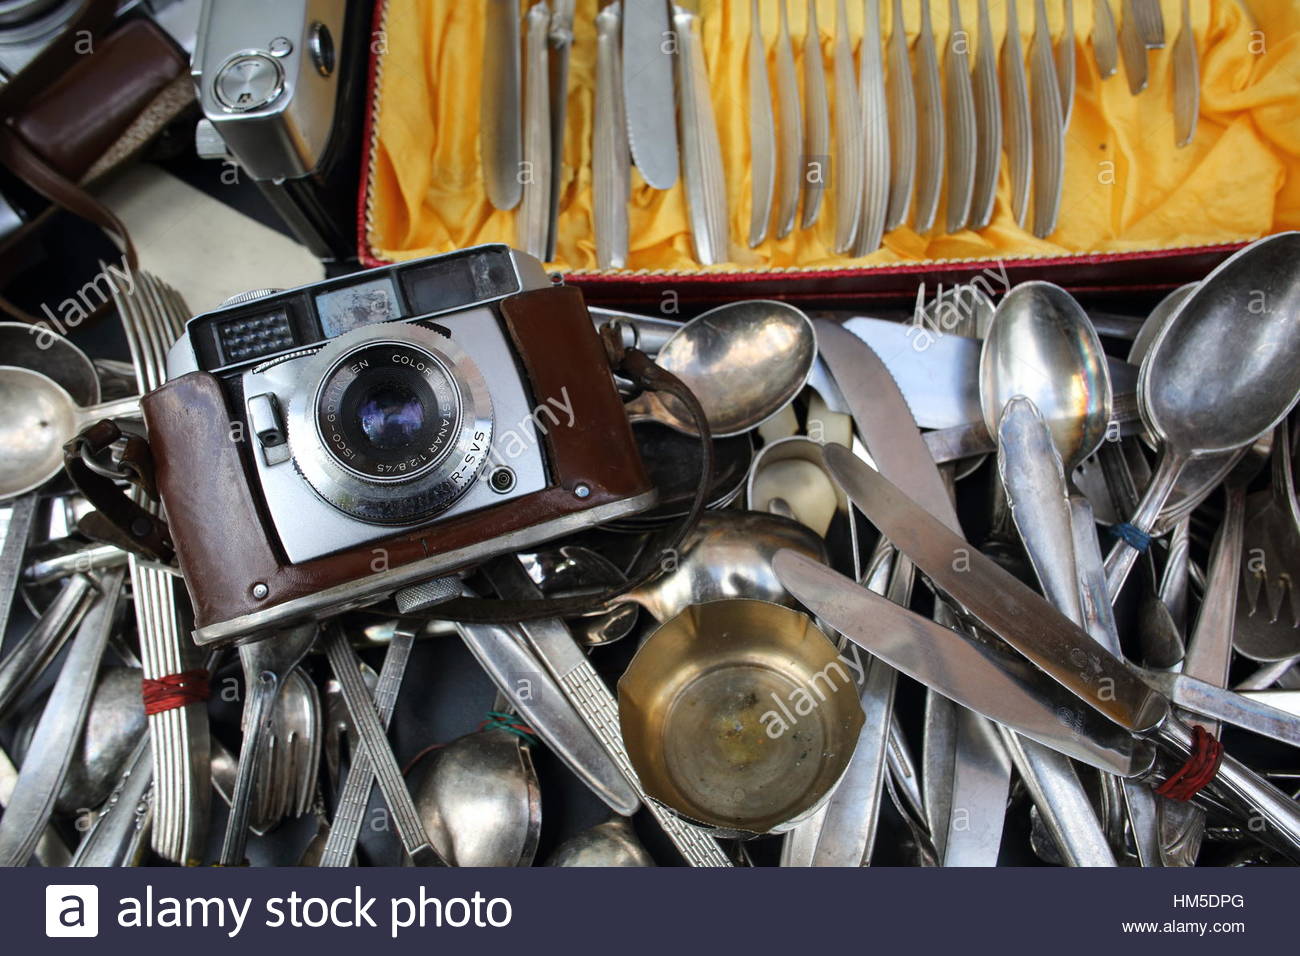 A camera and old silver spoons and knives all flung together in a second hand shop Stock Photo